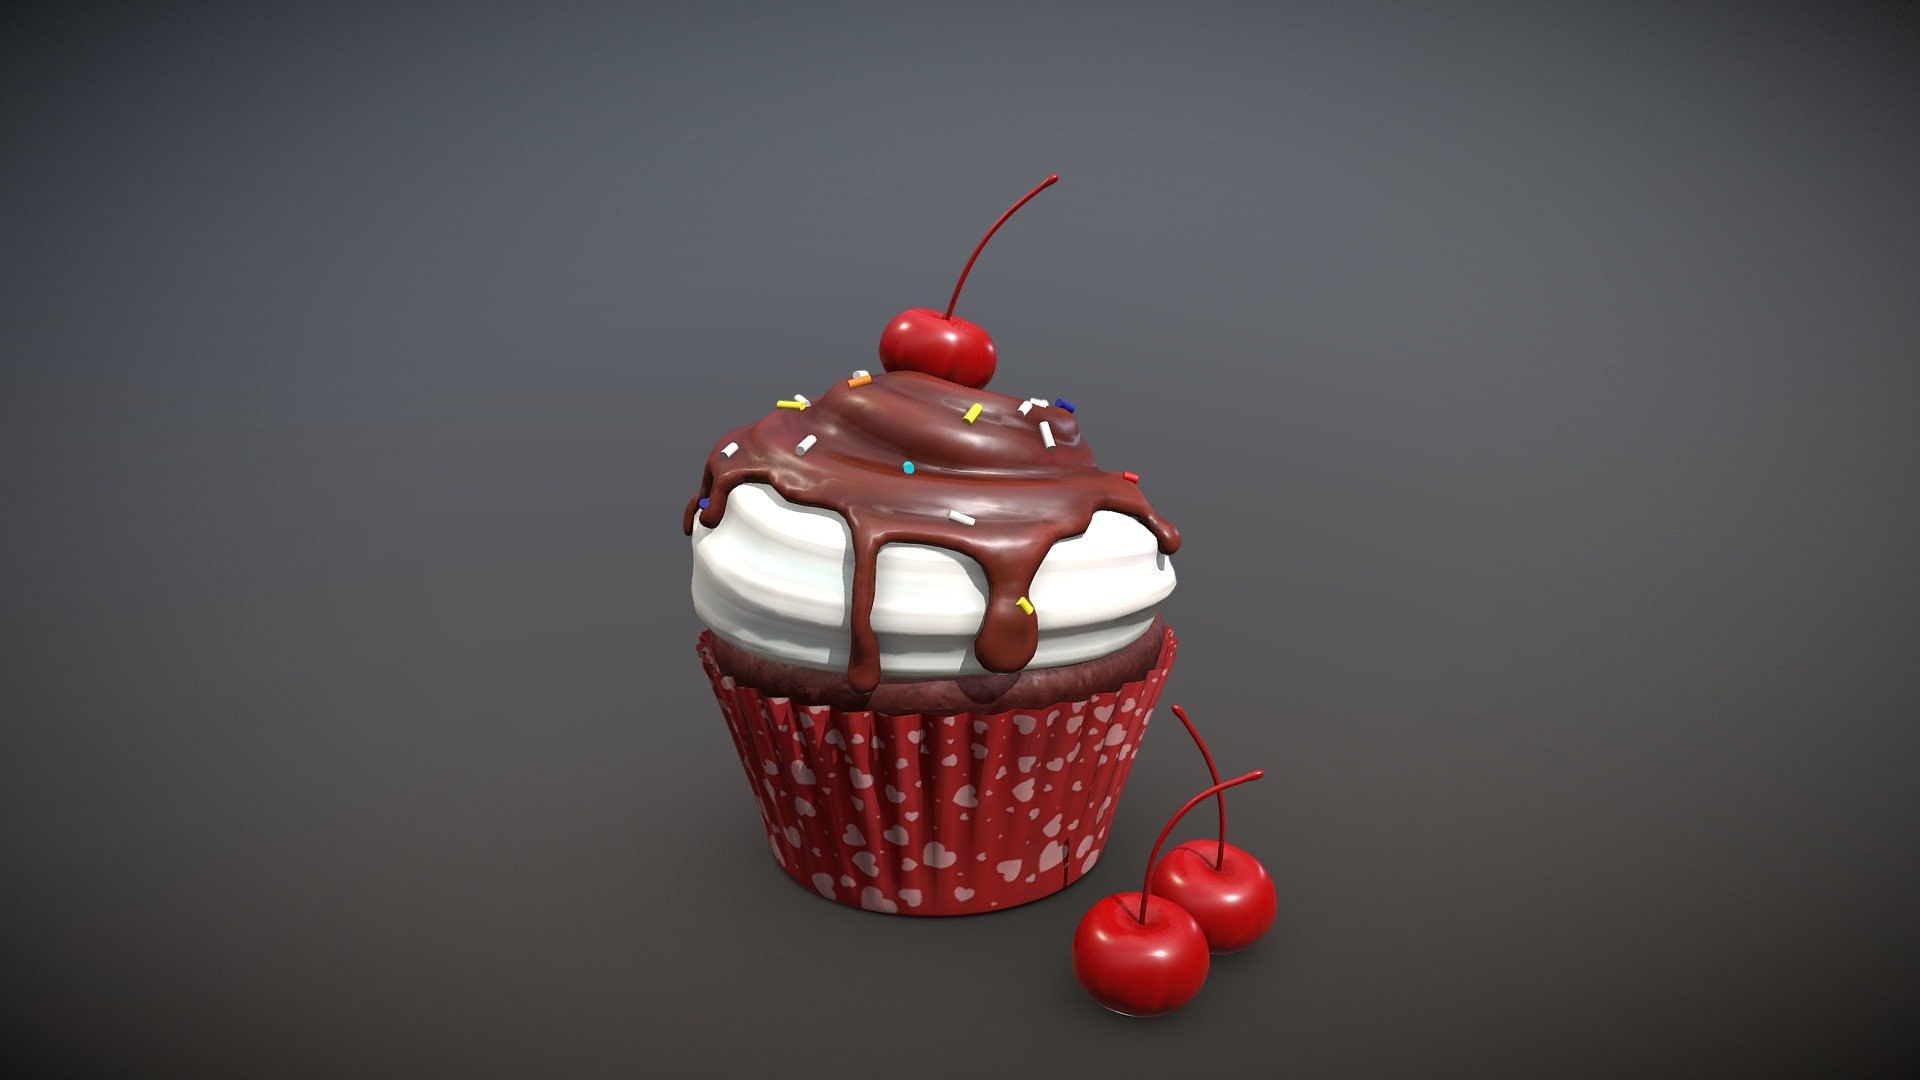 Middle-poly model of a cupcake, made for rendering 3d model